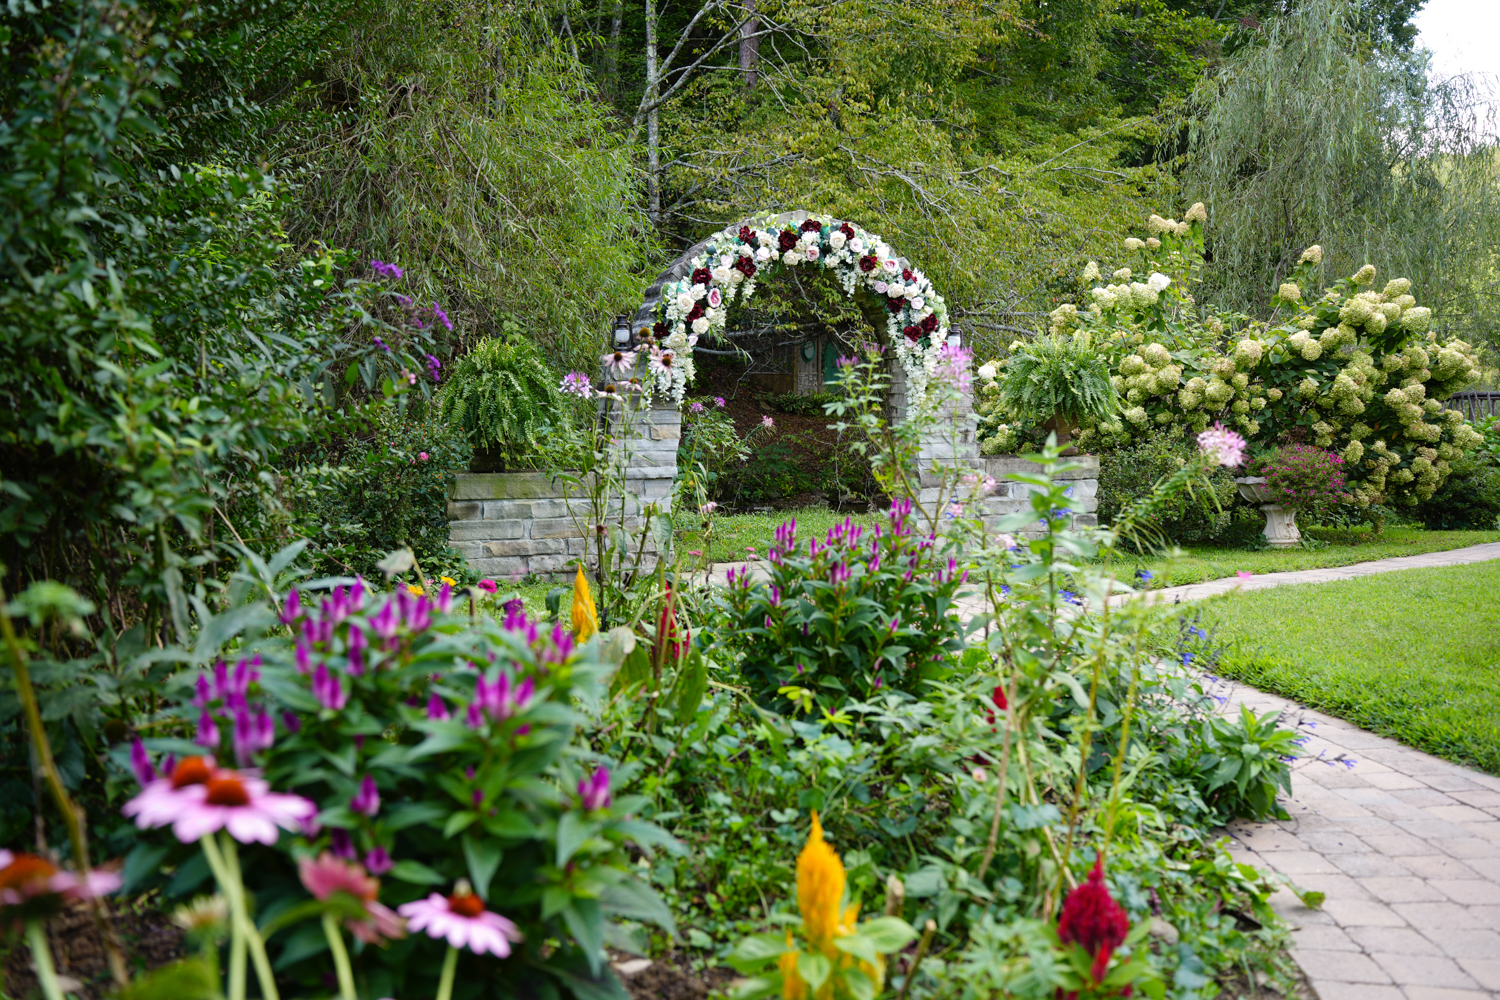 Stone archway decorated with white and navy blue flowers in front of a fall wildflower garden